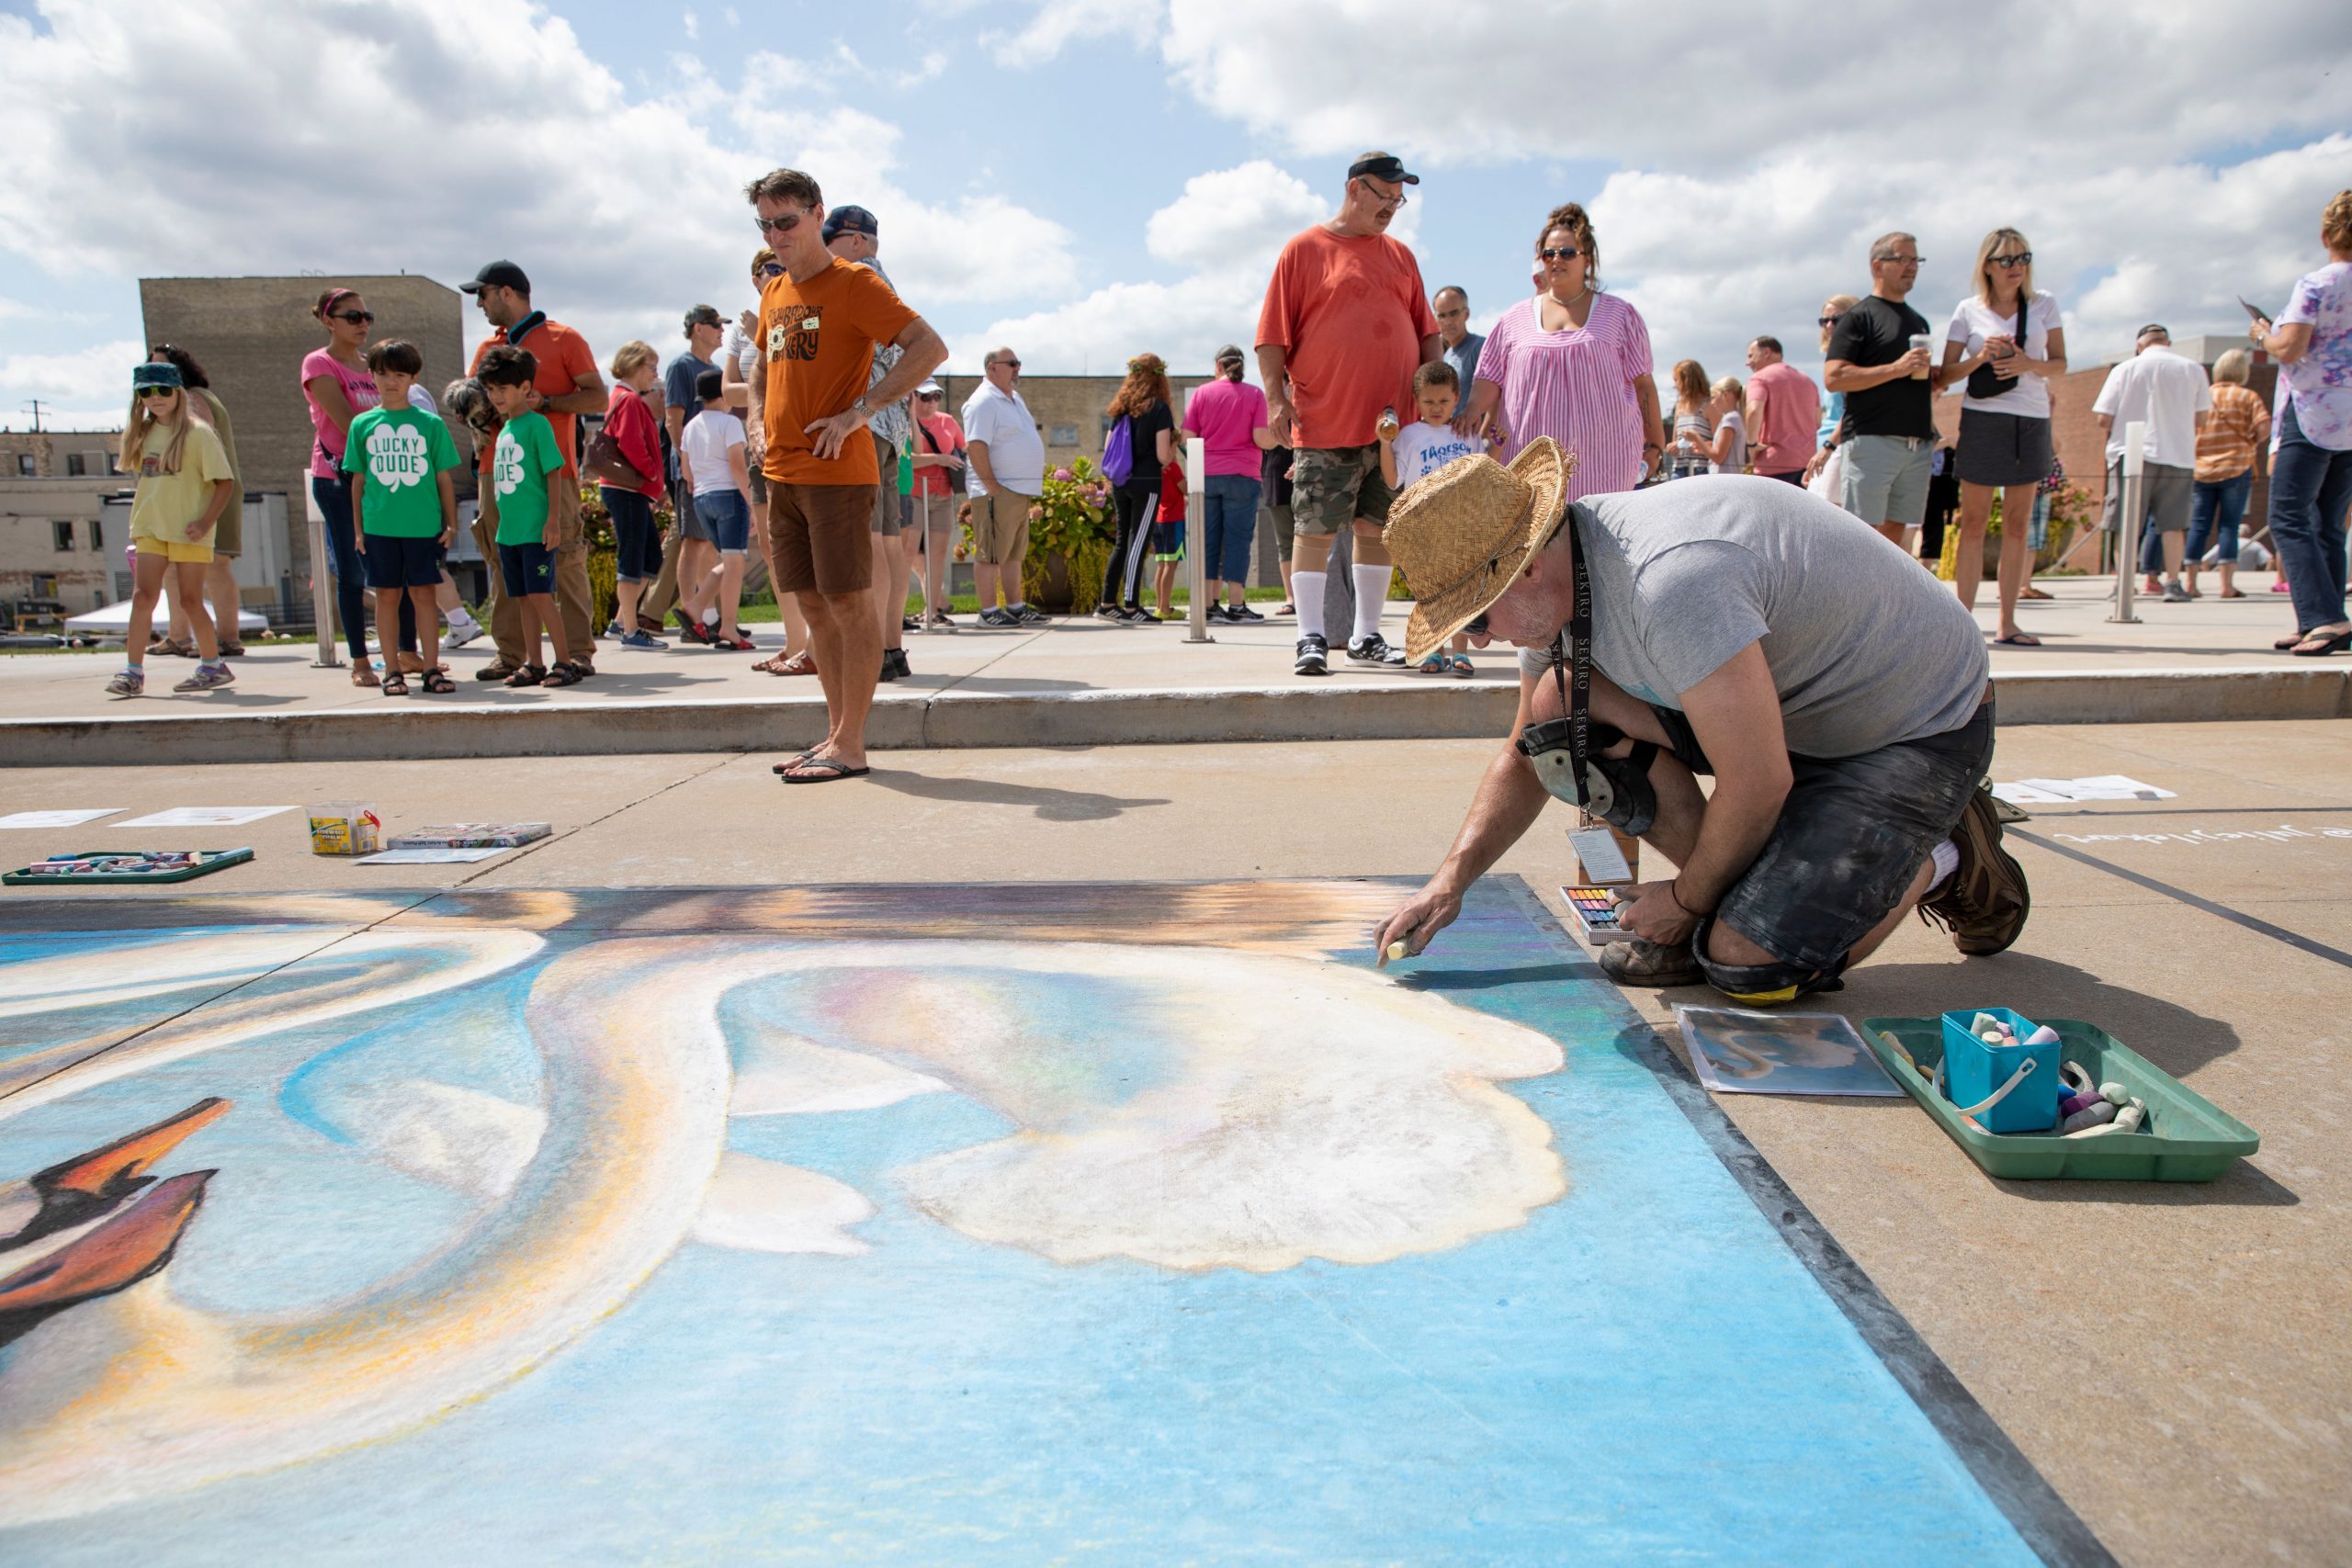 Fifth annual Art & Chalk Fest to take place August 20–21